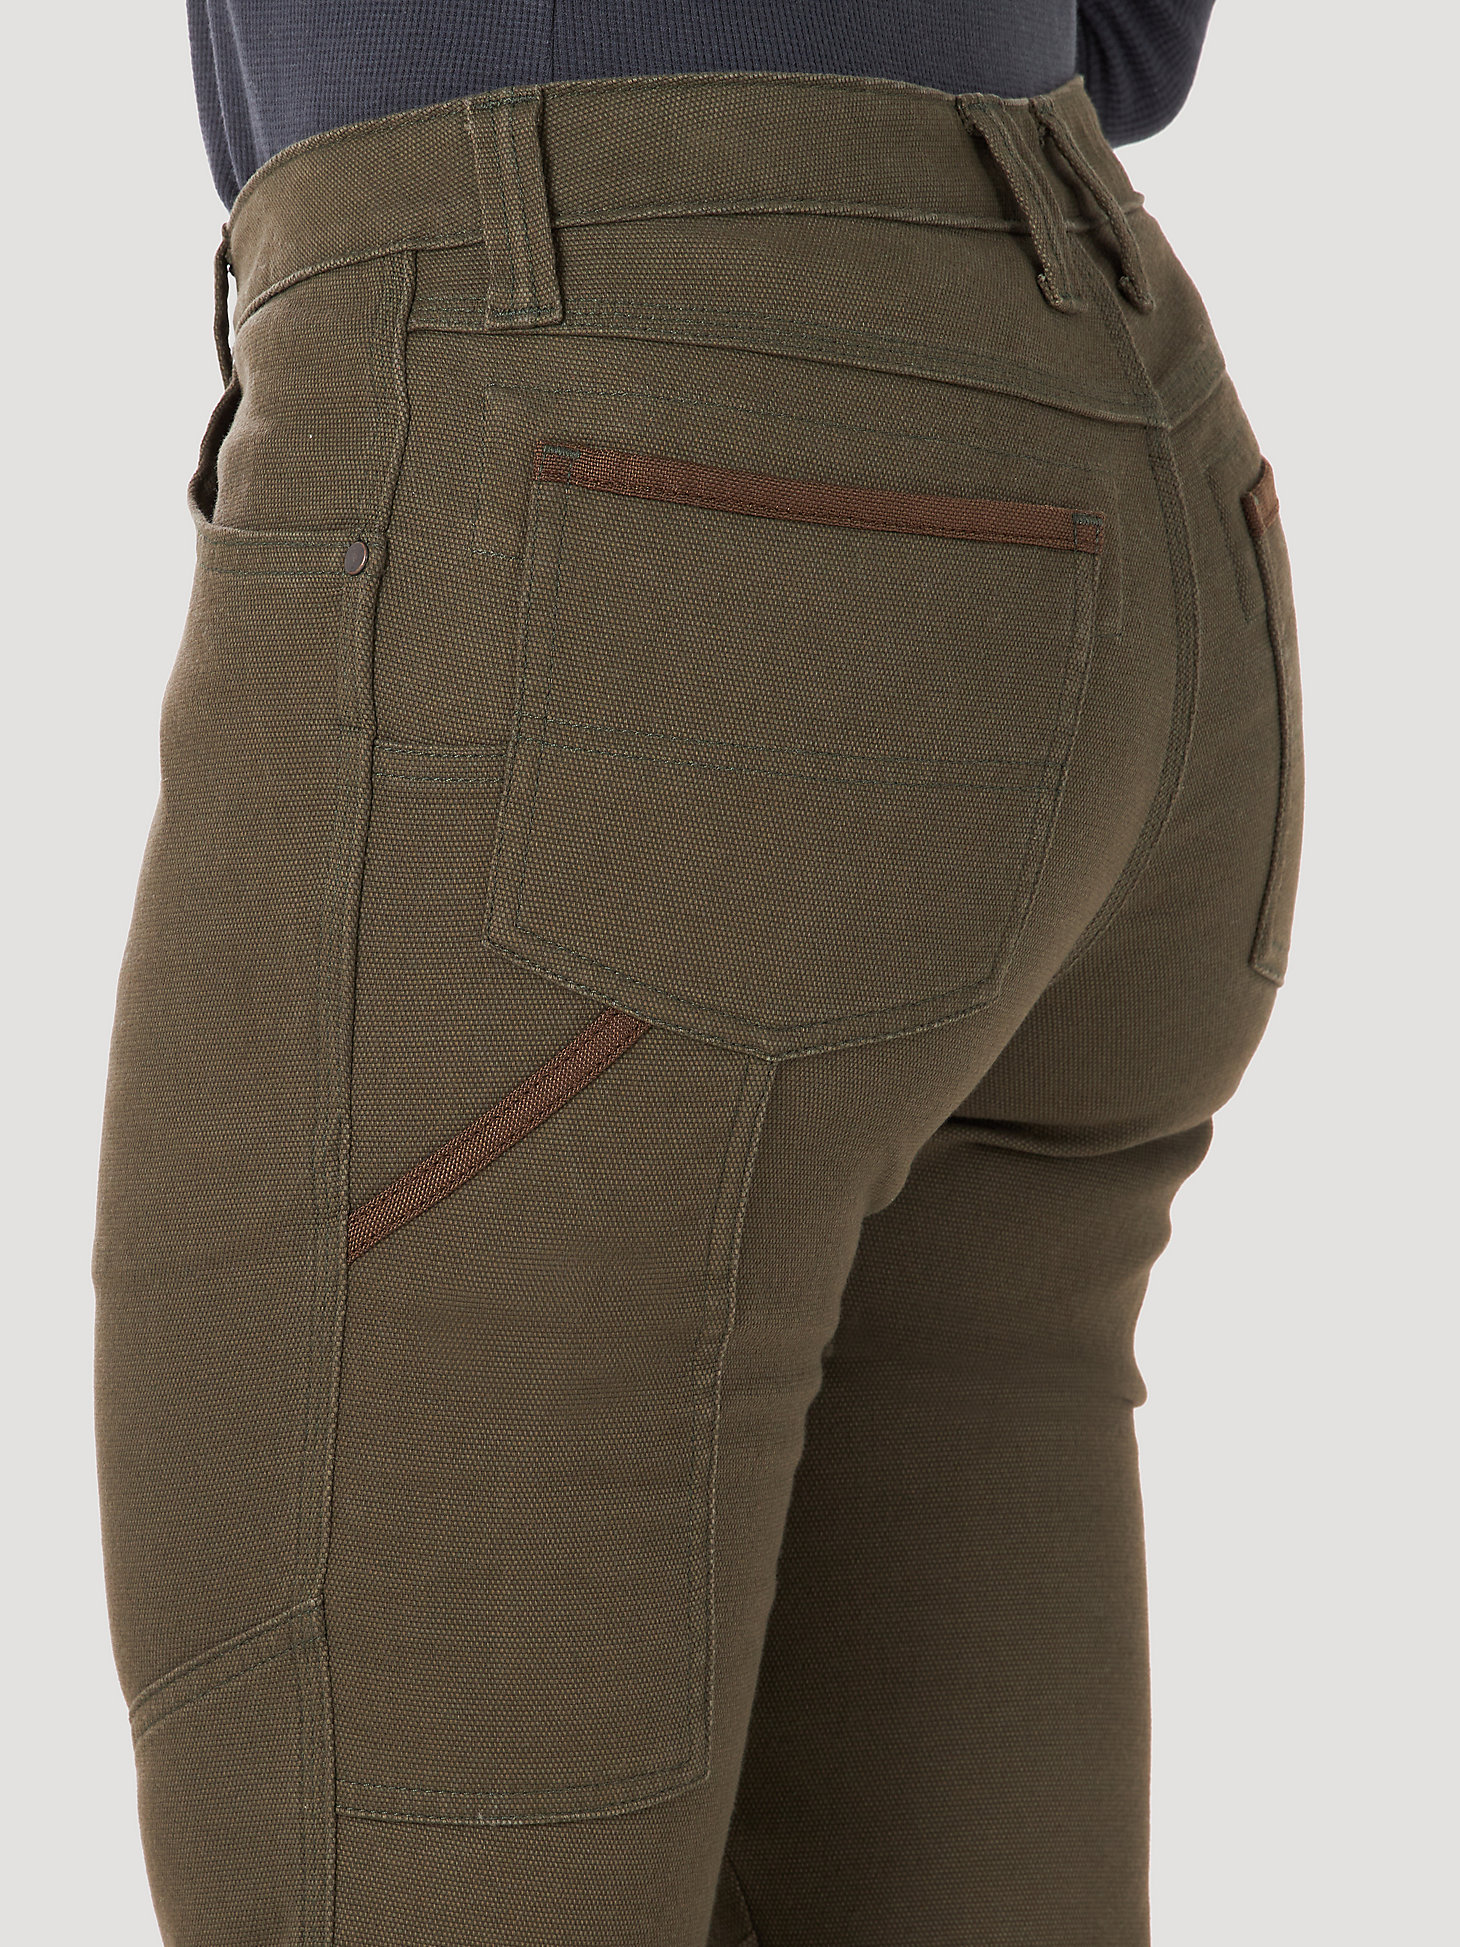 Women's Wrangler® RIGGS Workwear® Straight Fit Utility Work Pant in Loden alternative view 5